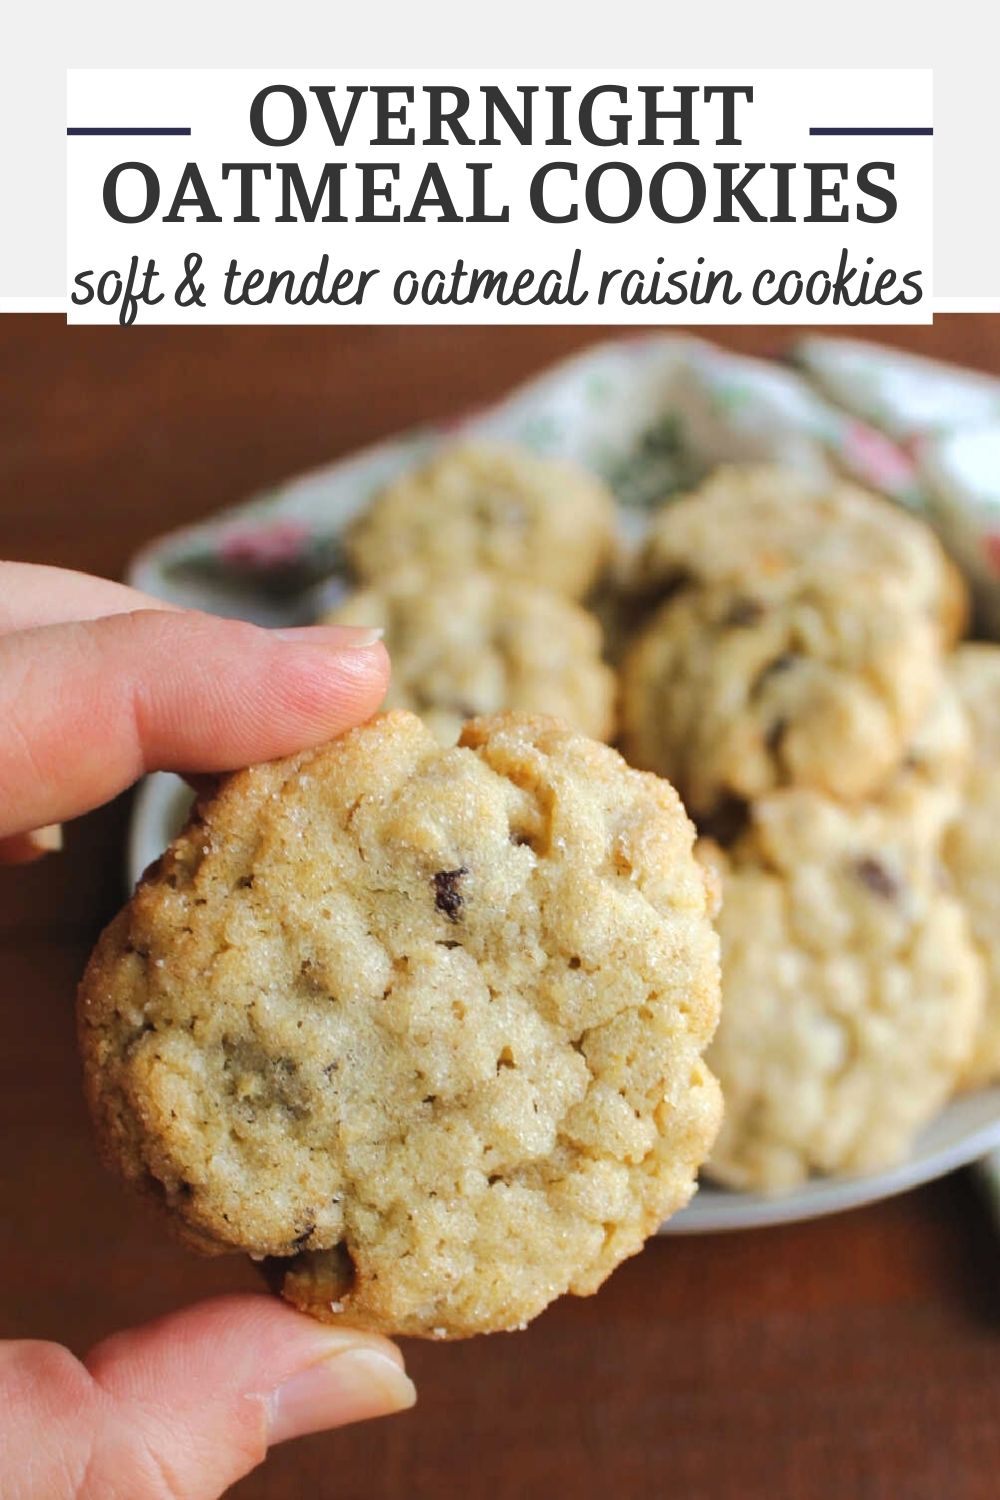 Overnight oatmeal raisin cookies take two days to make, but their soft chewy texture makes it worth the wait. This old fashioned recipe is straight from my great-grandma's recipe box and the tender cookies are still a favorite.